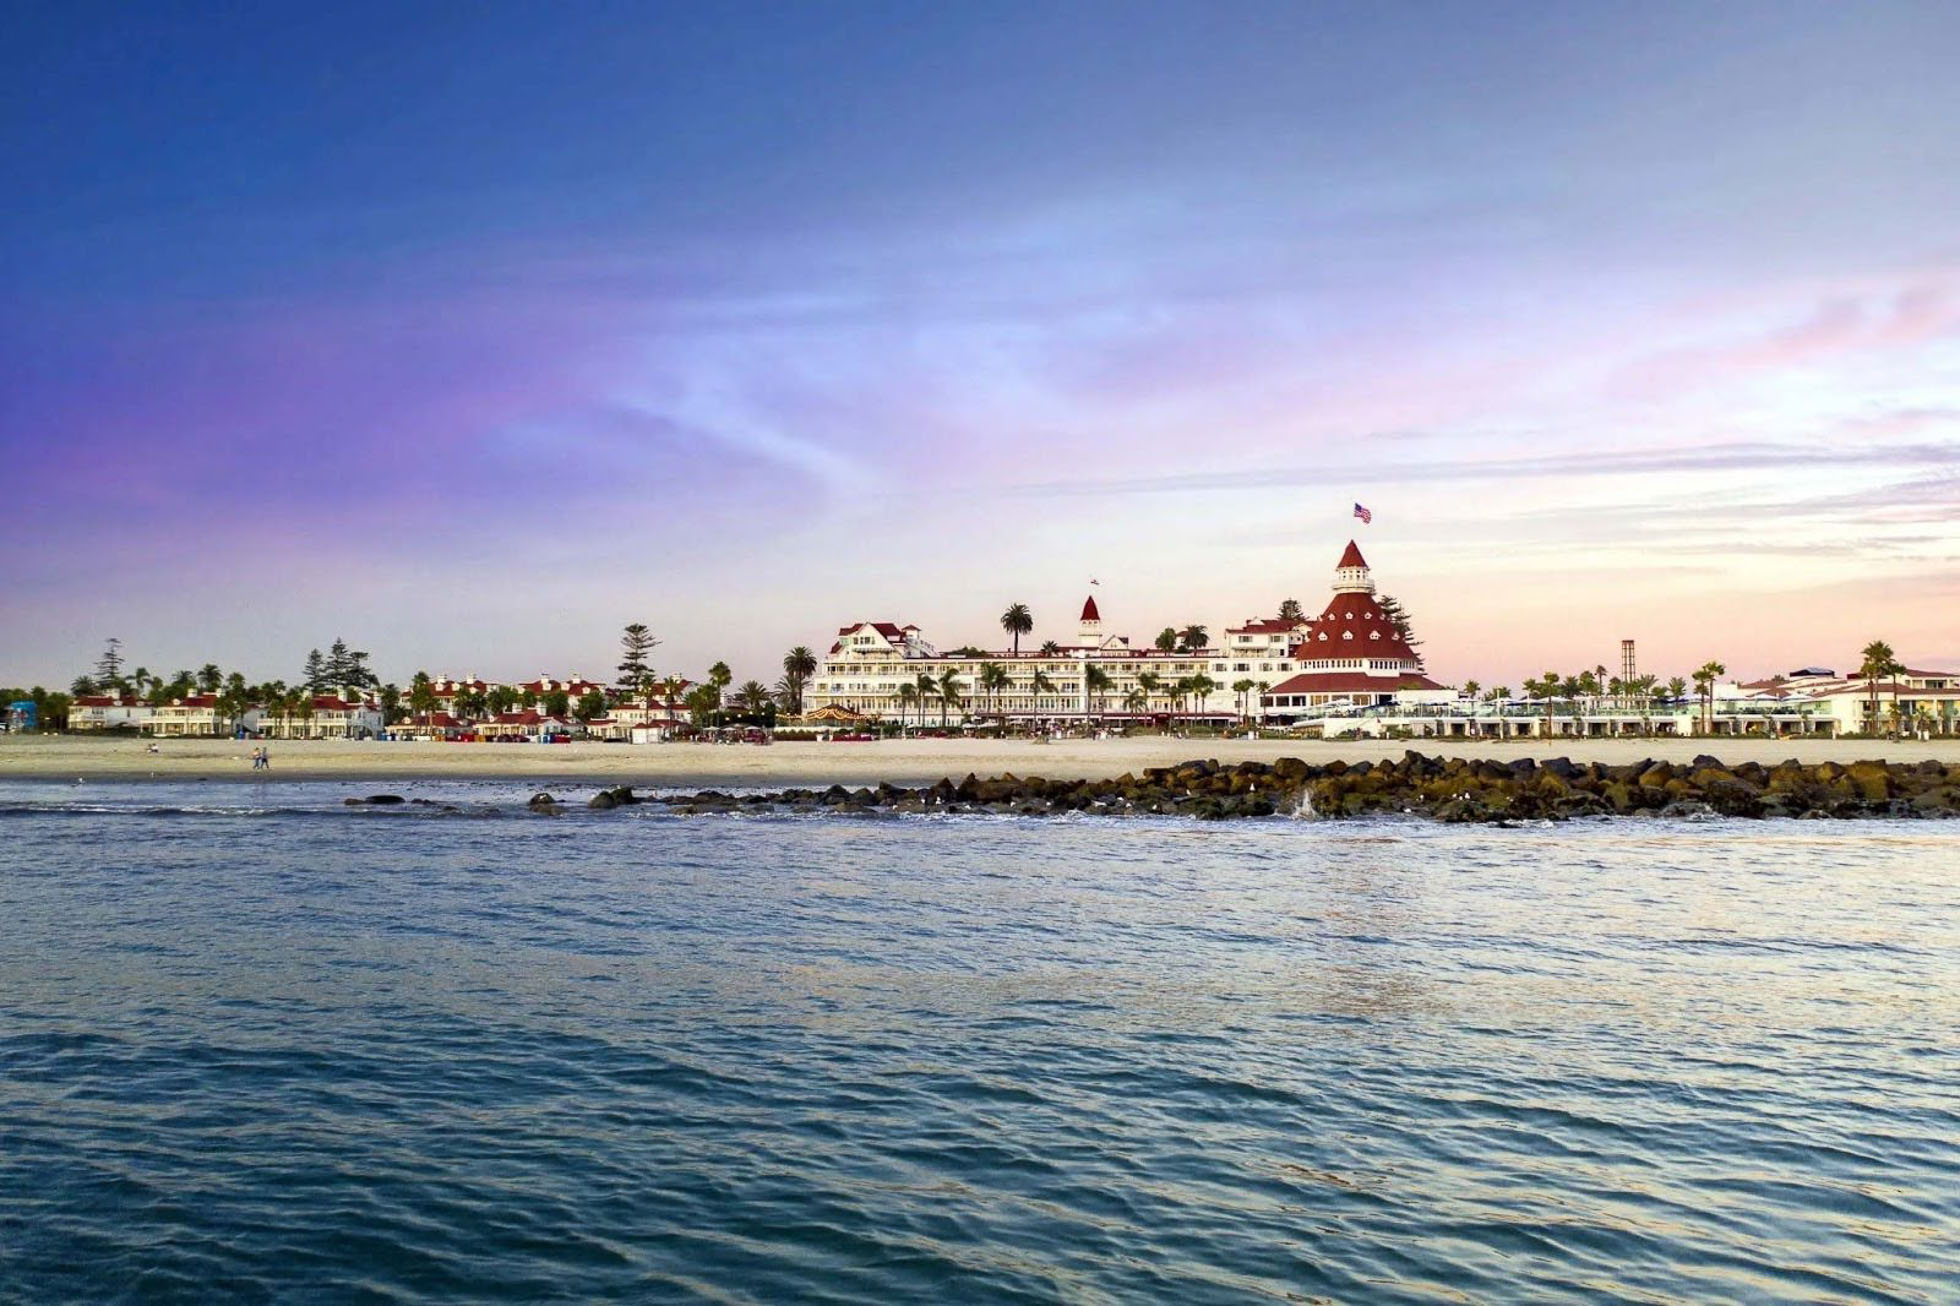 Iconic San Diego beachfront hotel captured at sunset, a picturesque location for beach weddings and bridal beauty services.